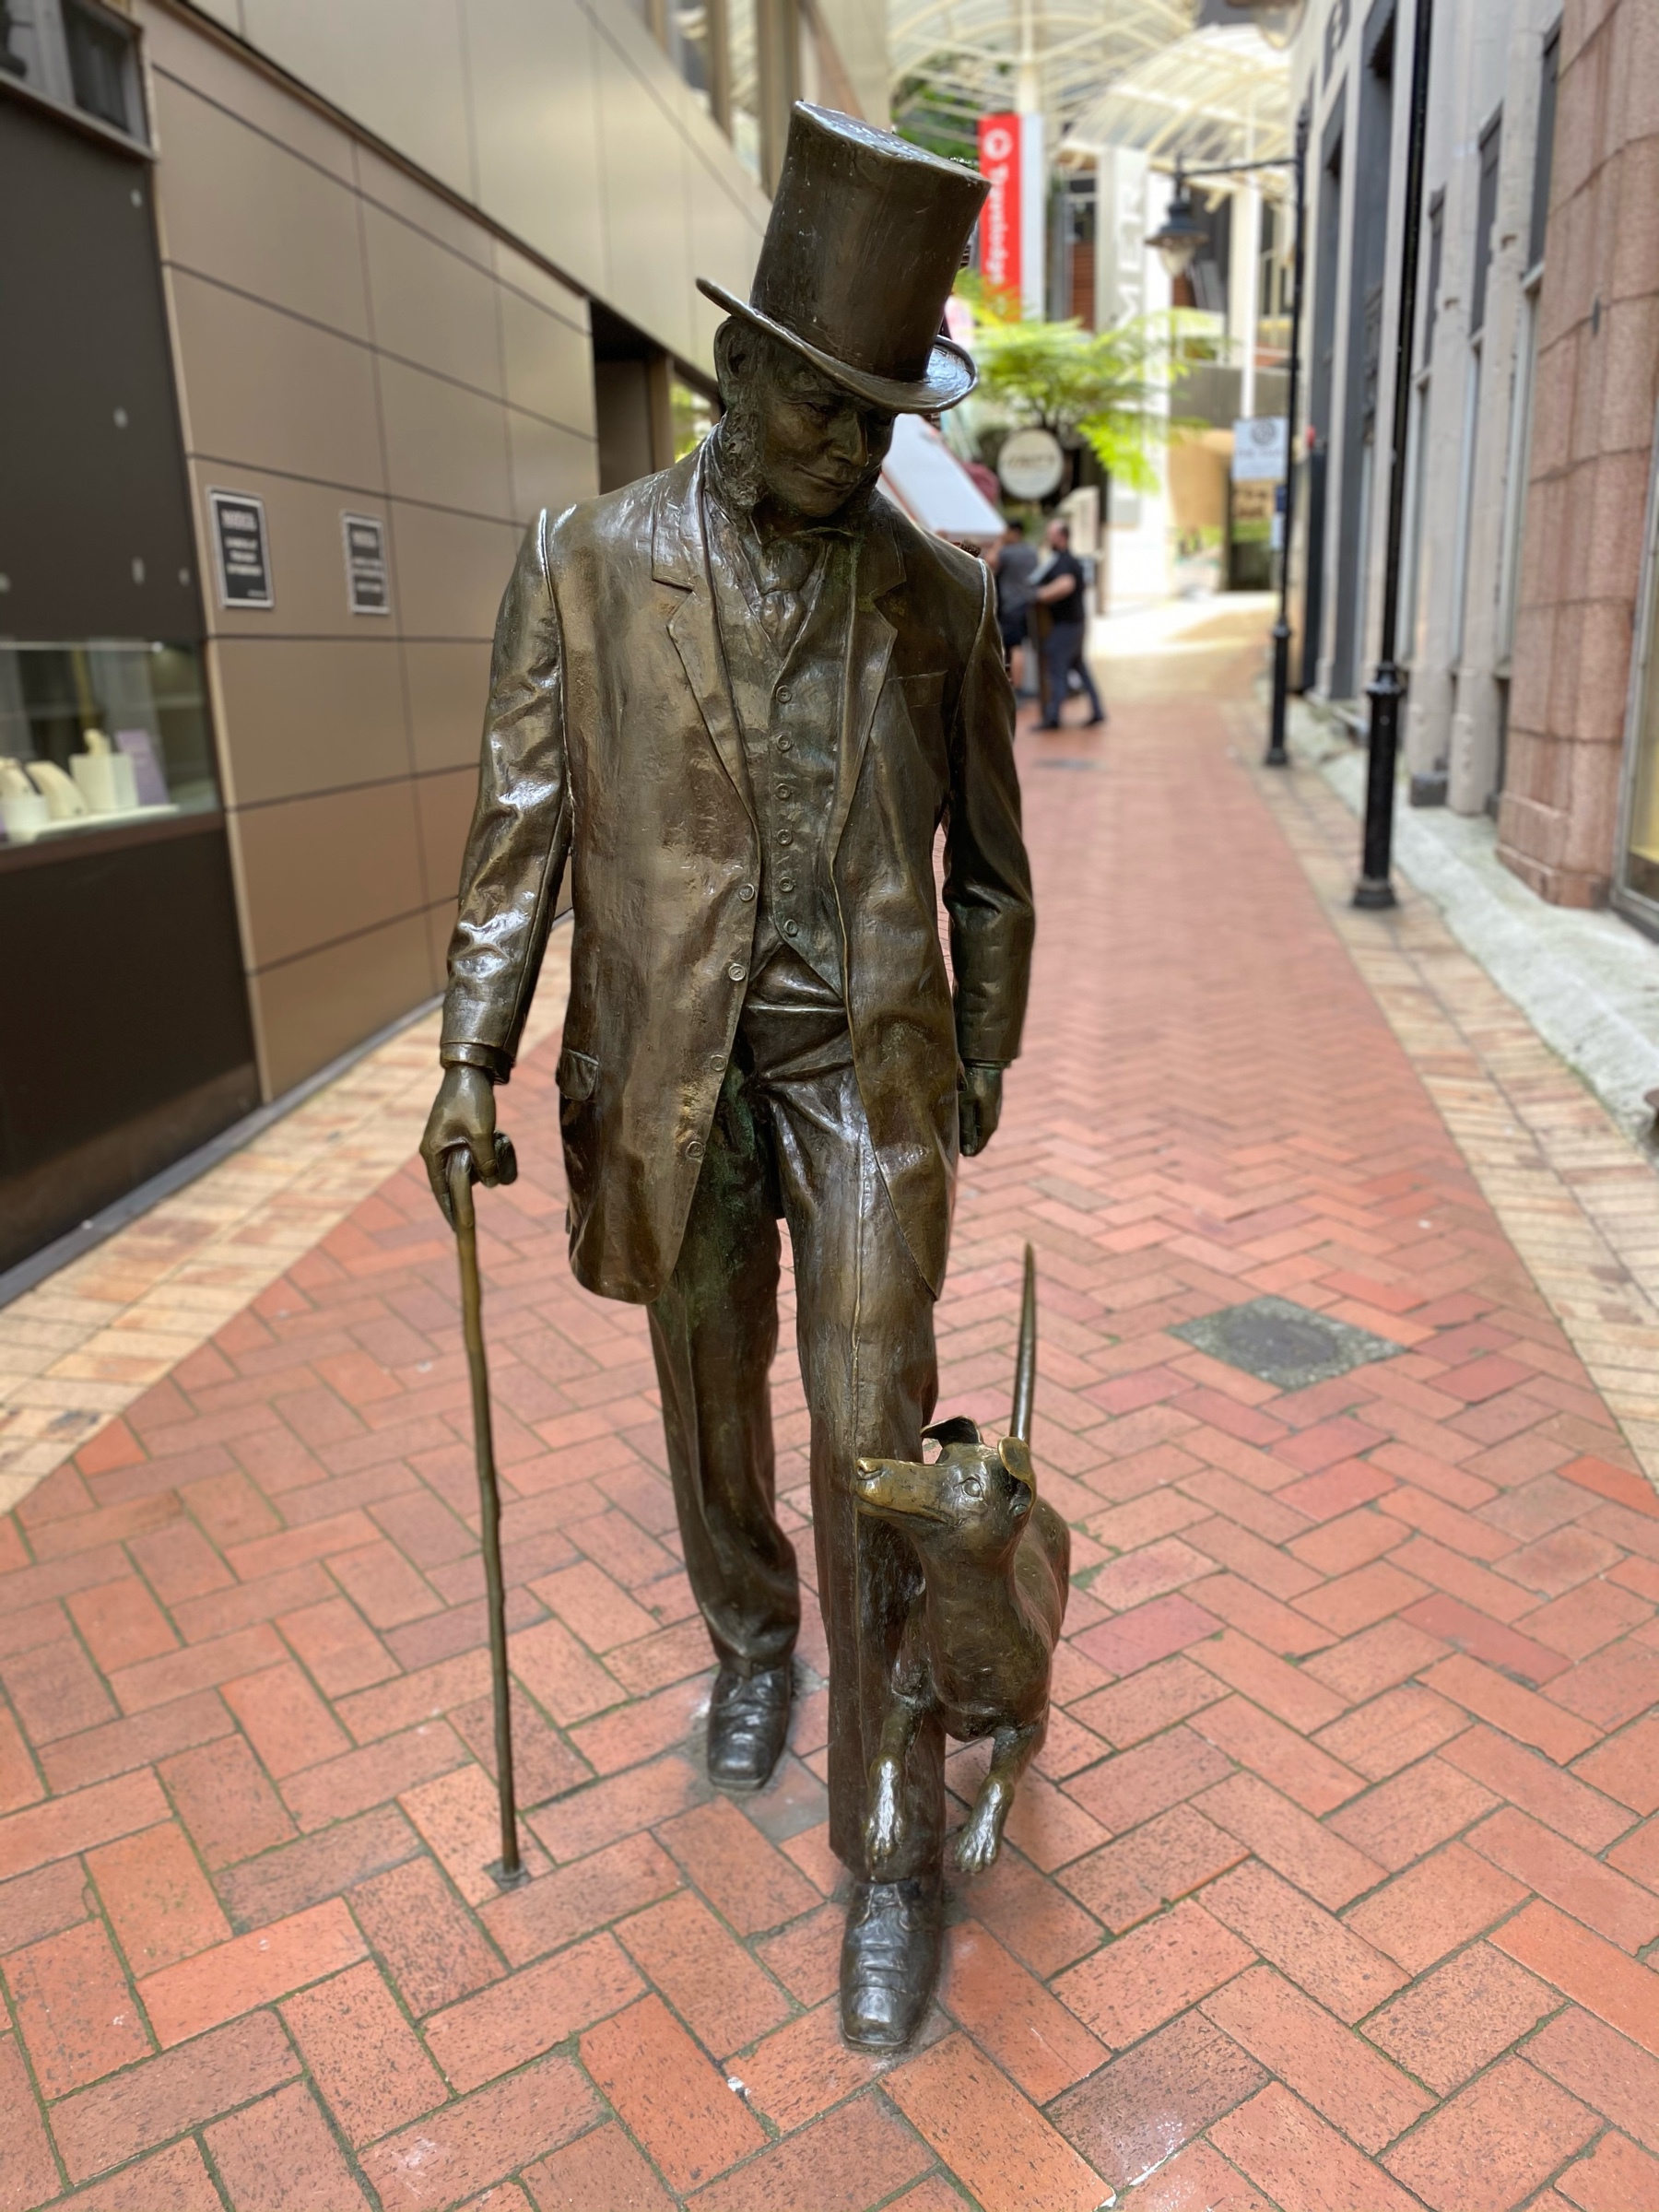 Statue of a man in a top hat with a small dog by his foot. 